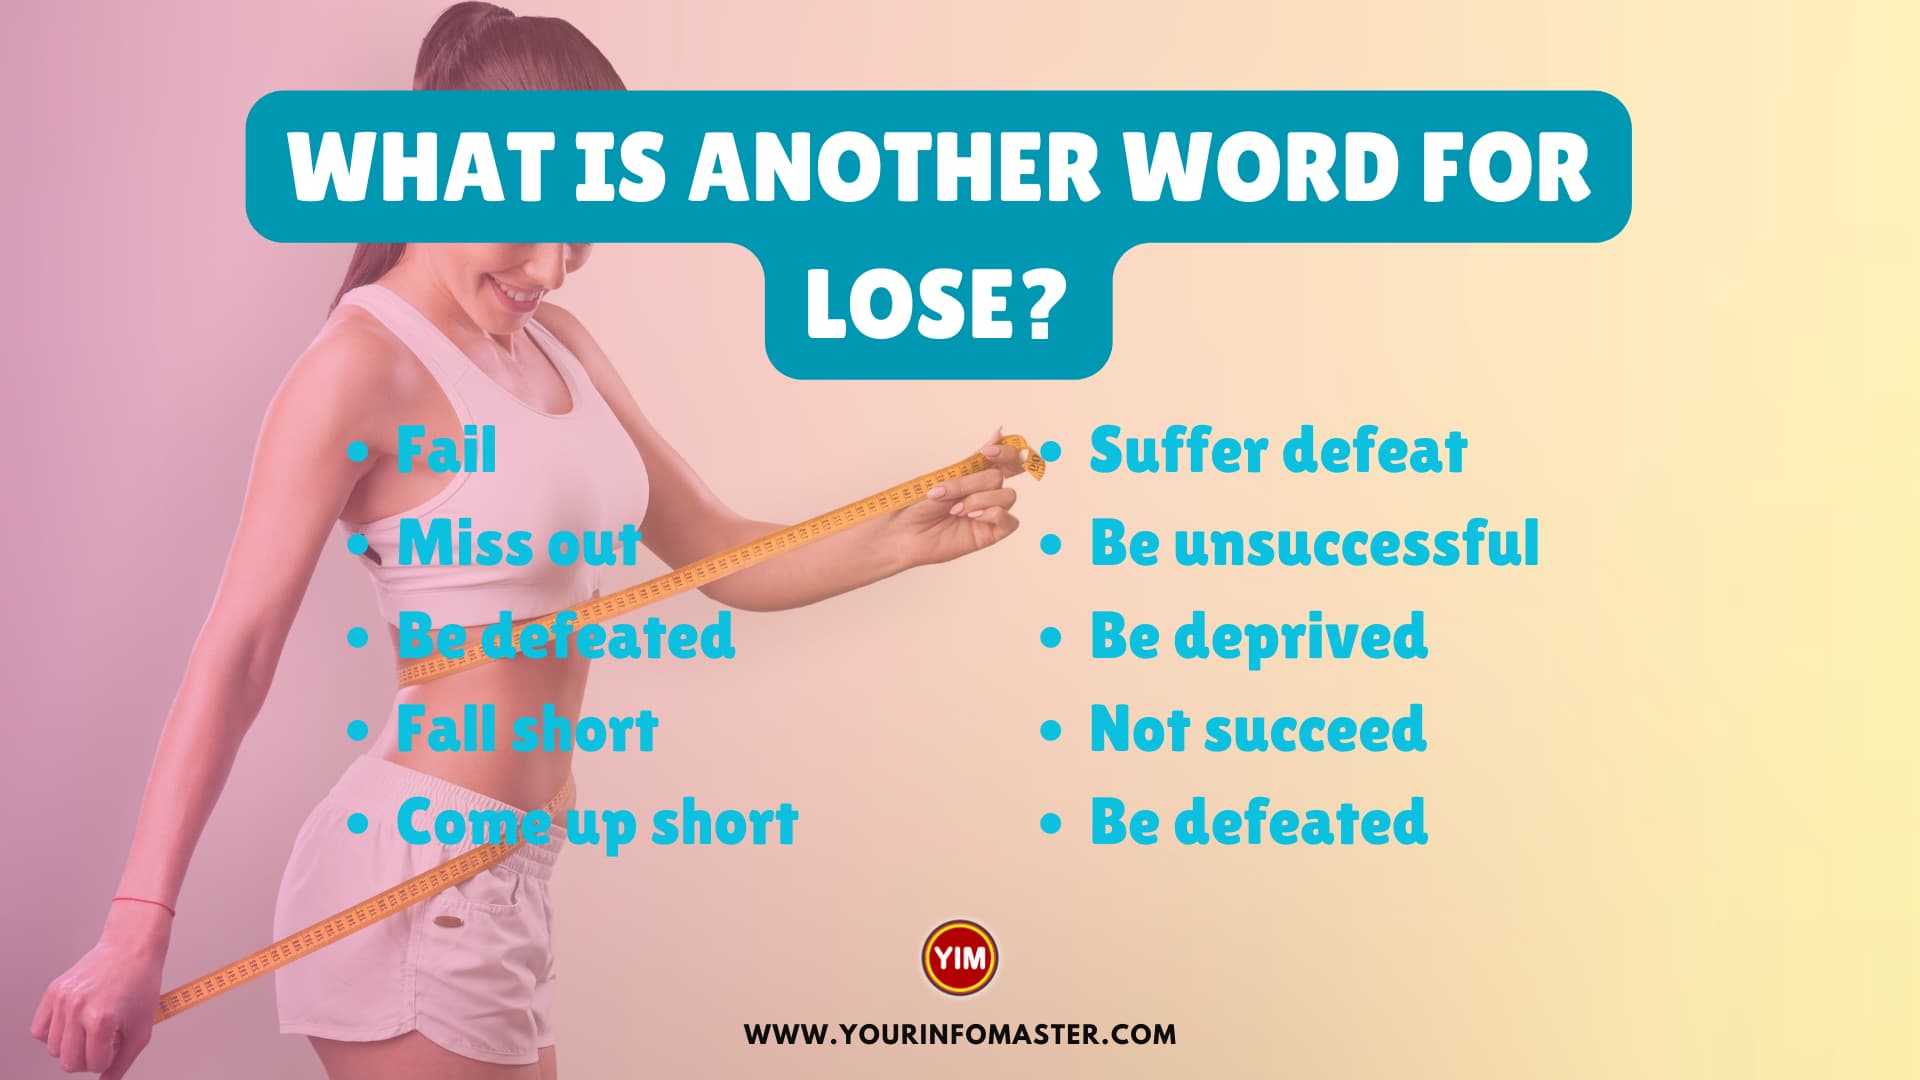 What is another word for Lose